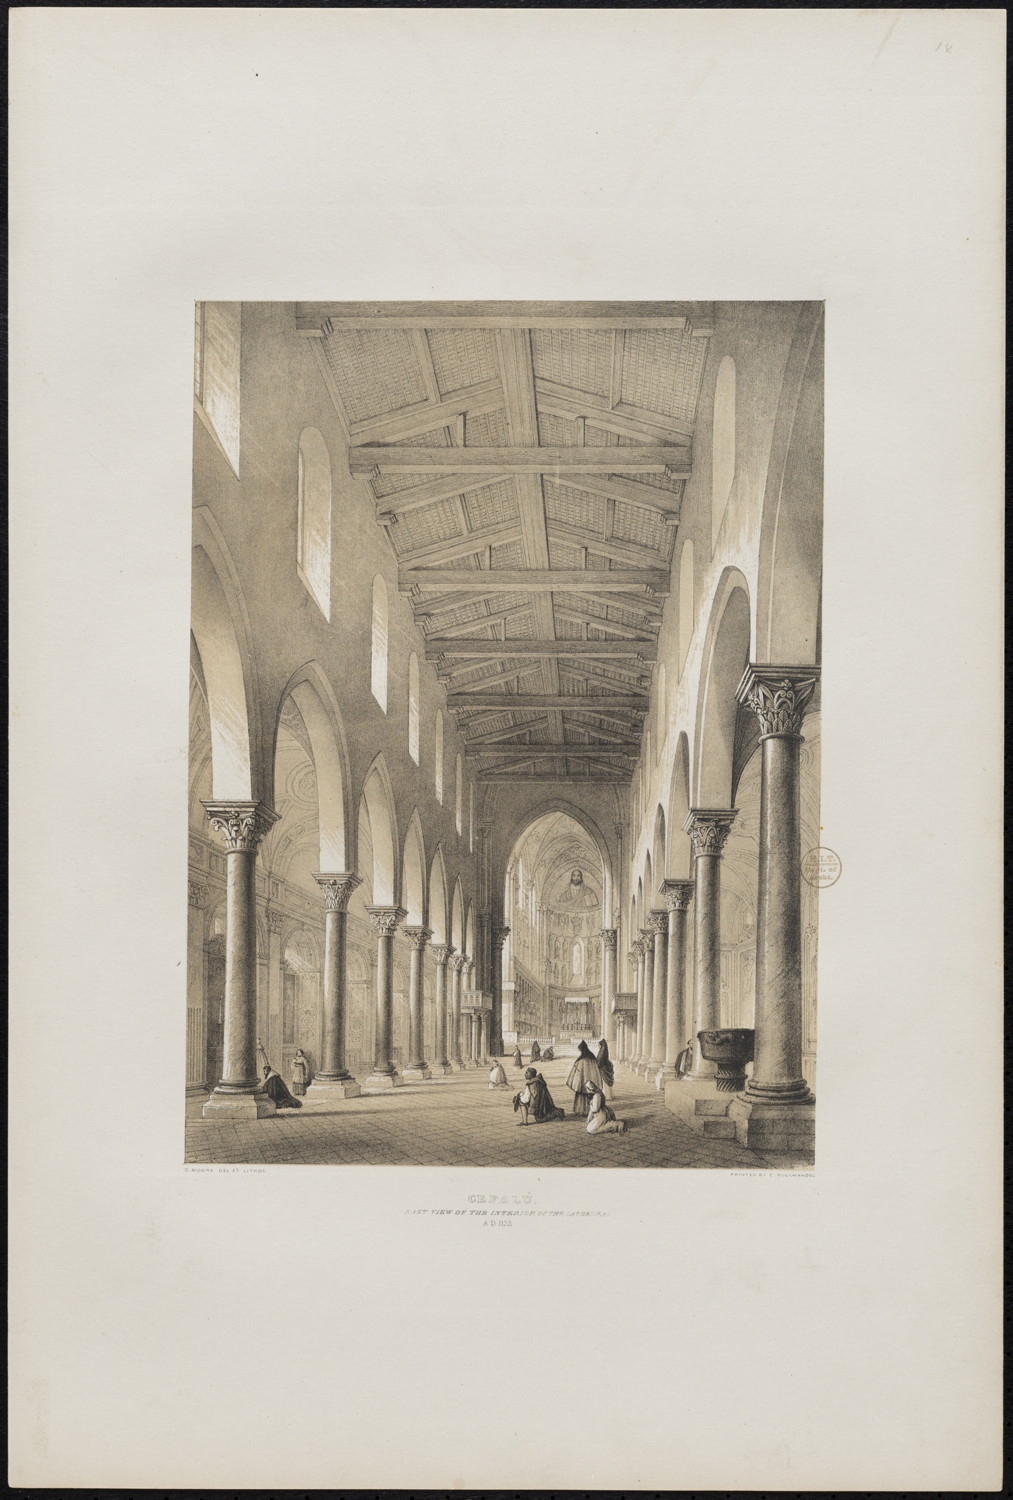 Lithograph, interior view of the cathedral